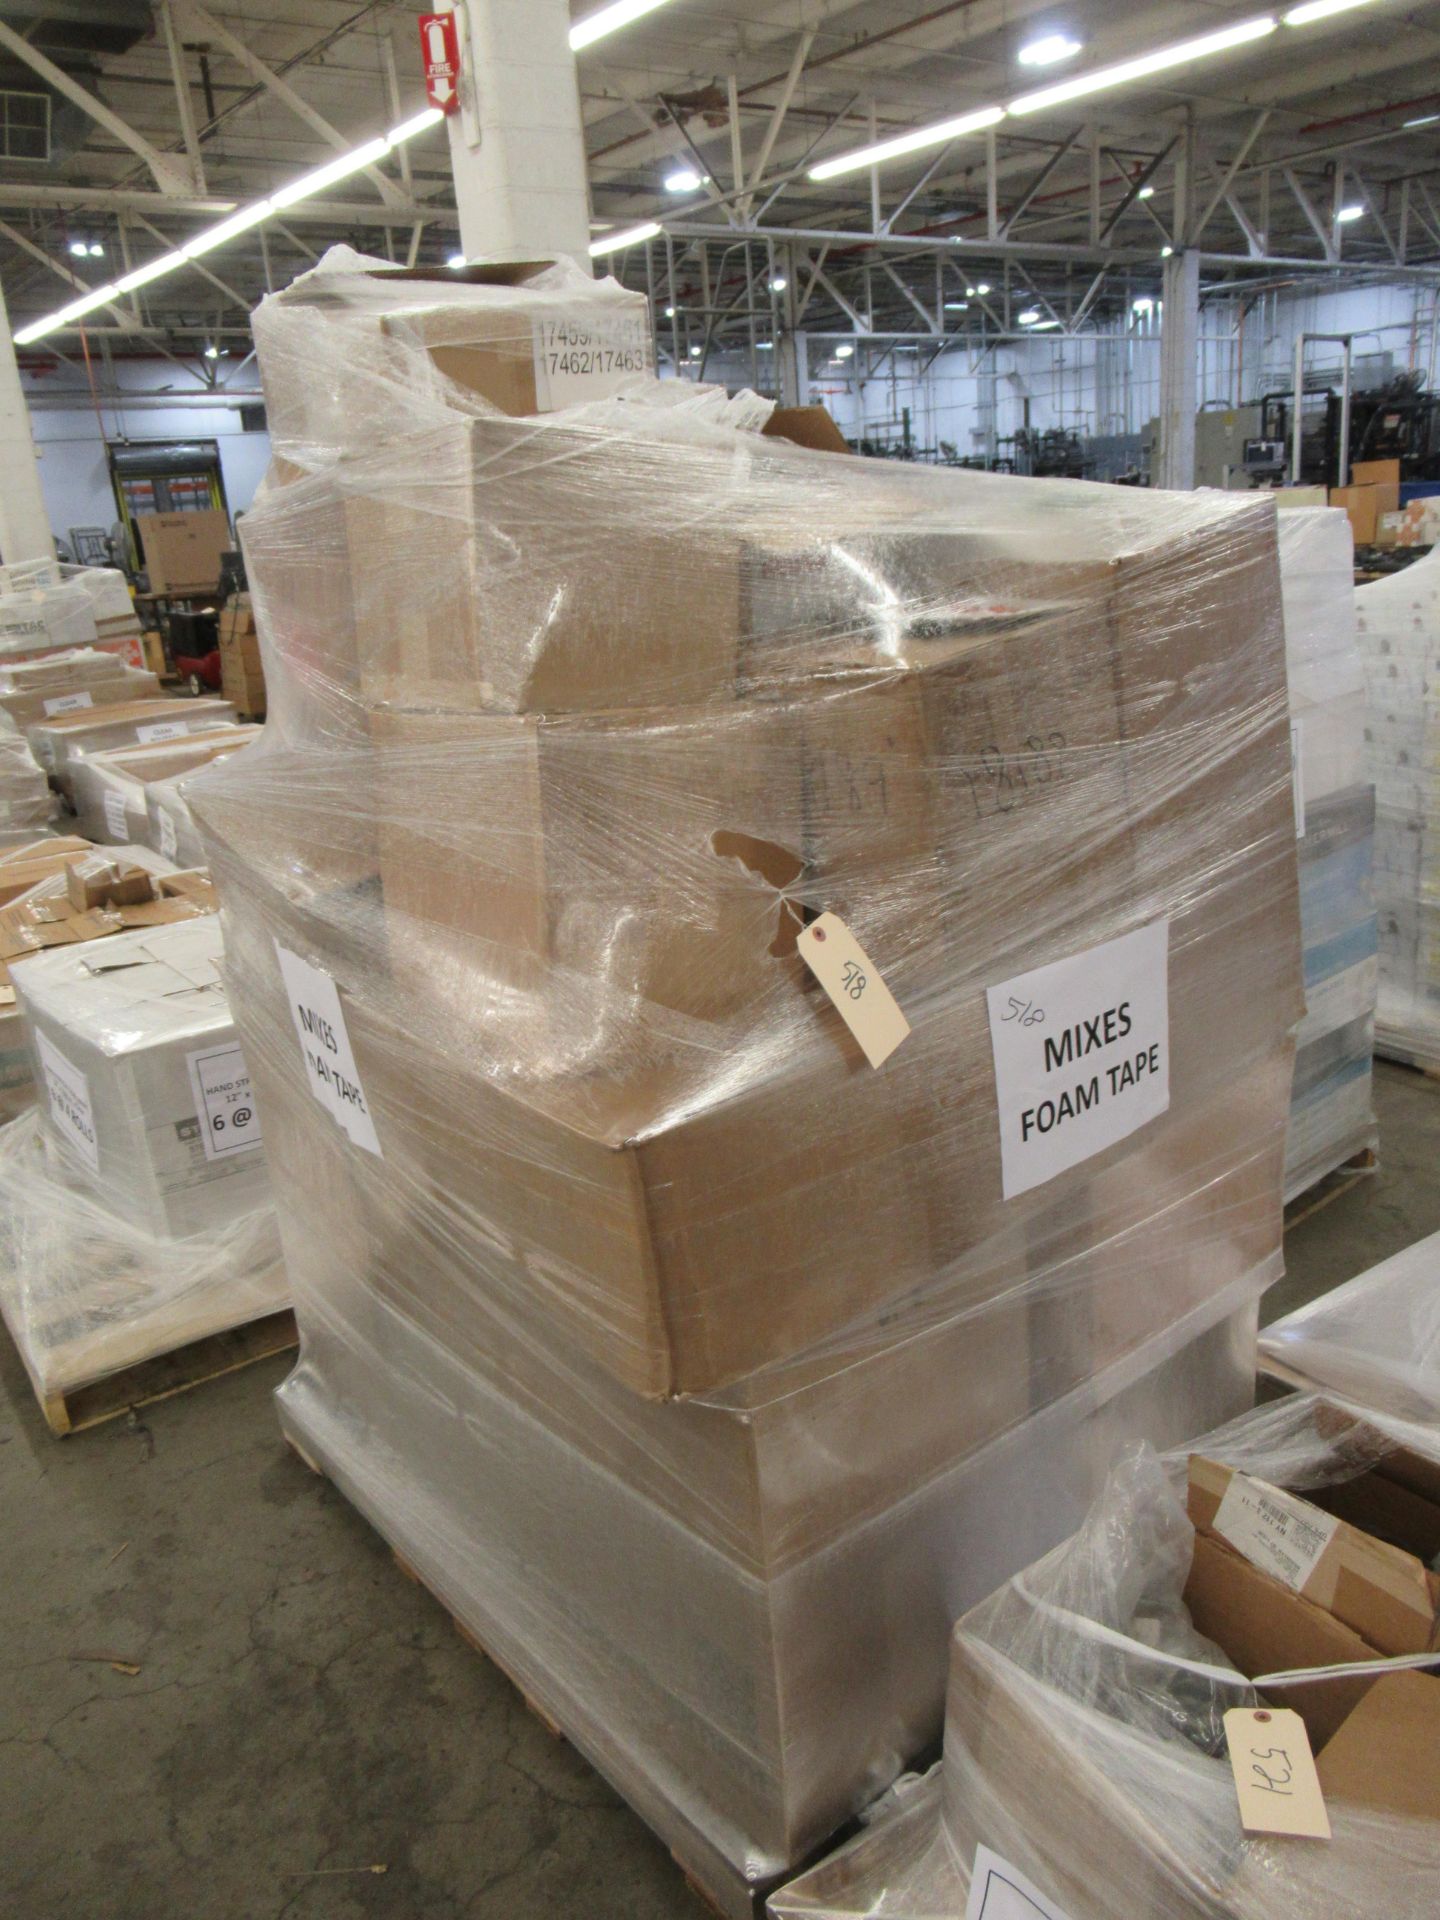 Pallet Mixed Foam Tapes - Image 2 of 2